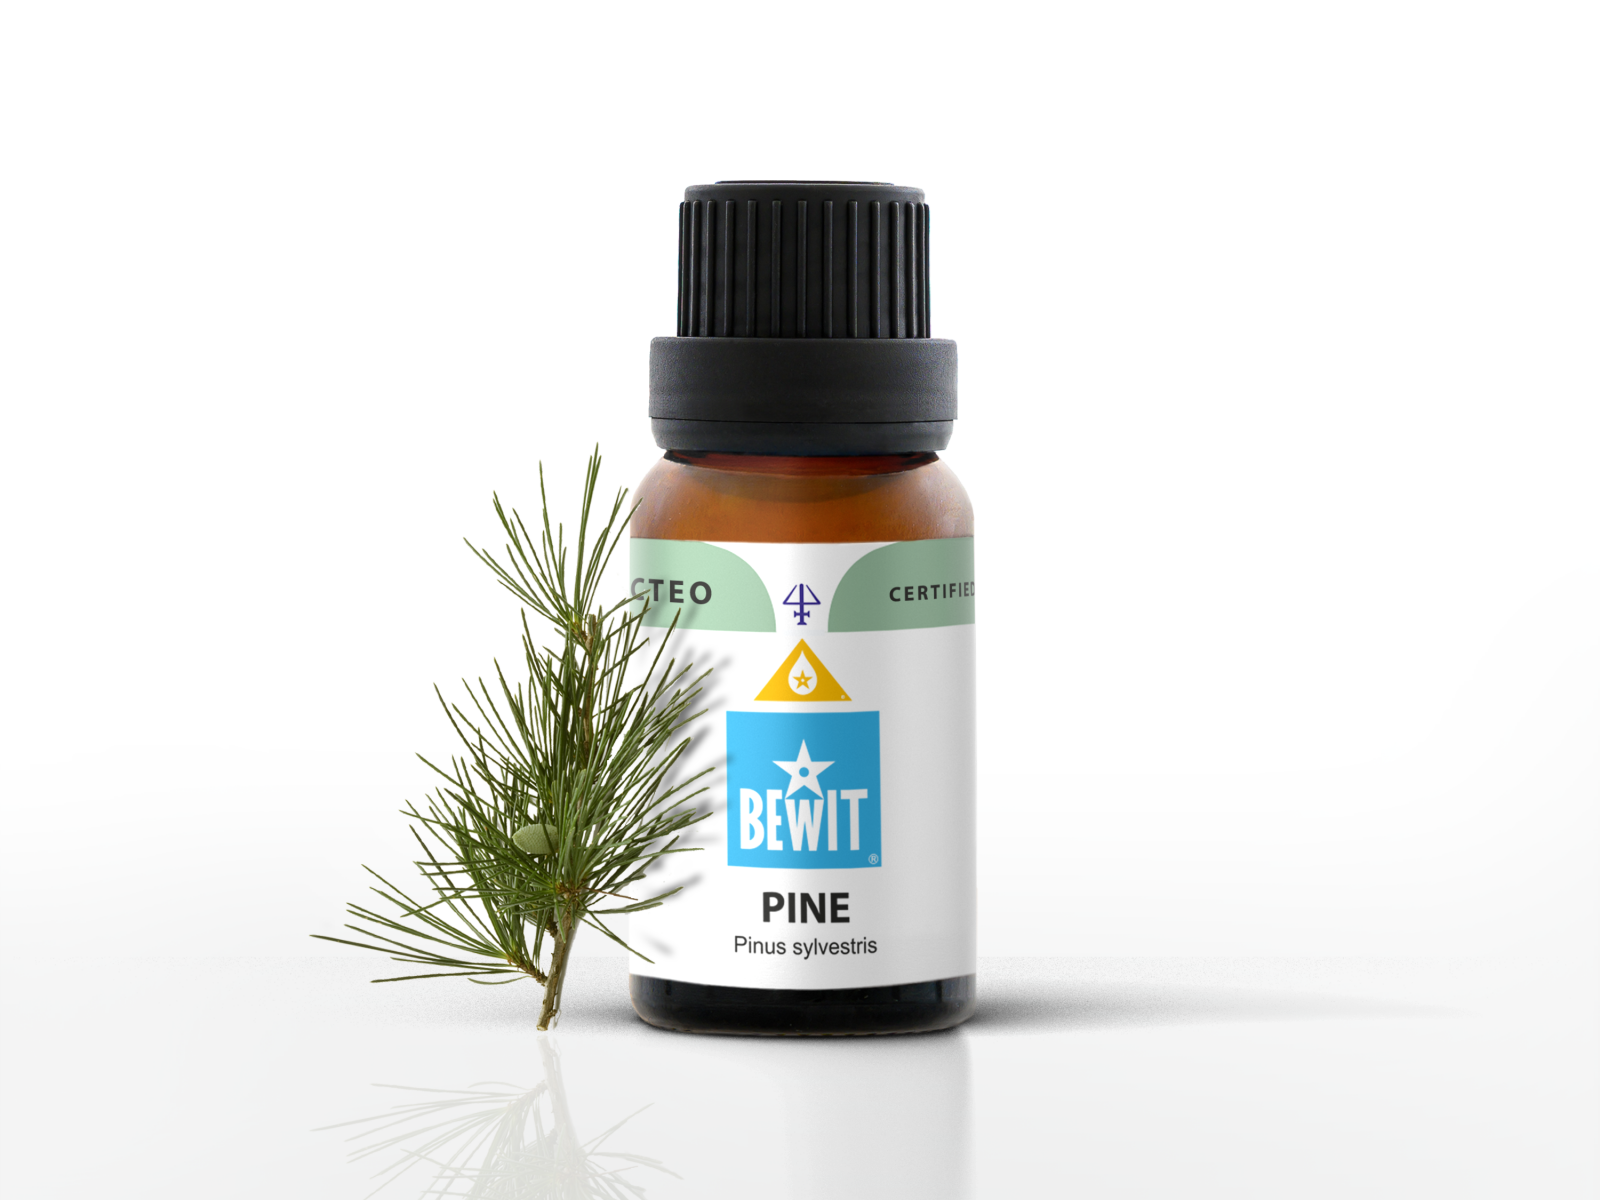 BEWIT Pine - This is a 100% pure essential oil - 1